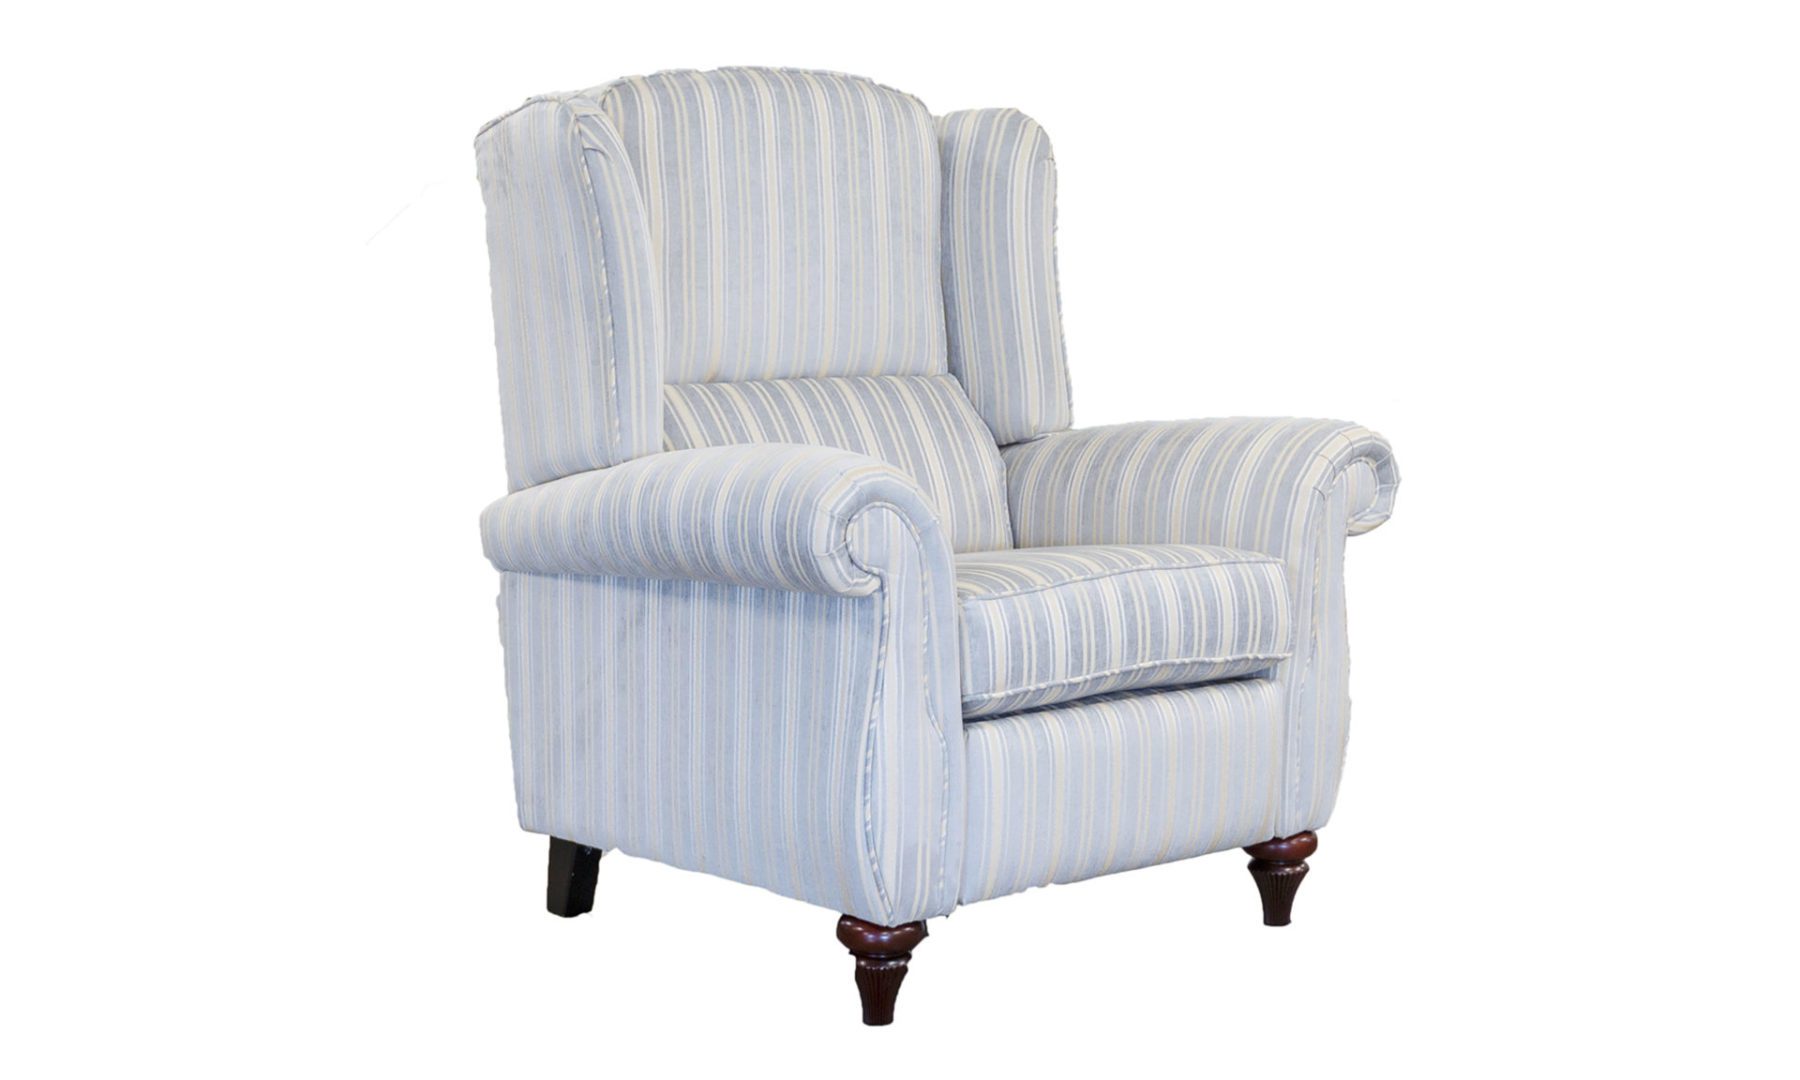 Greville Recliner Chair in Tolstoy Stripe Ocean, Platinum Collection Fabric